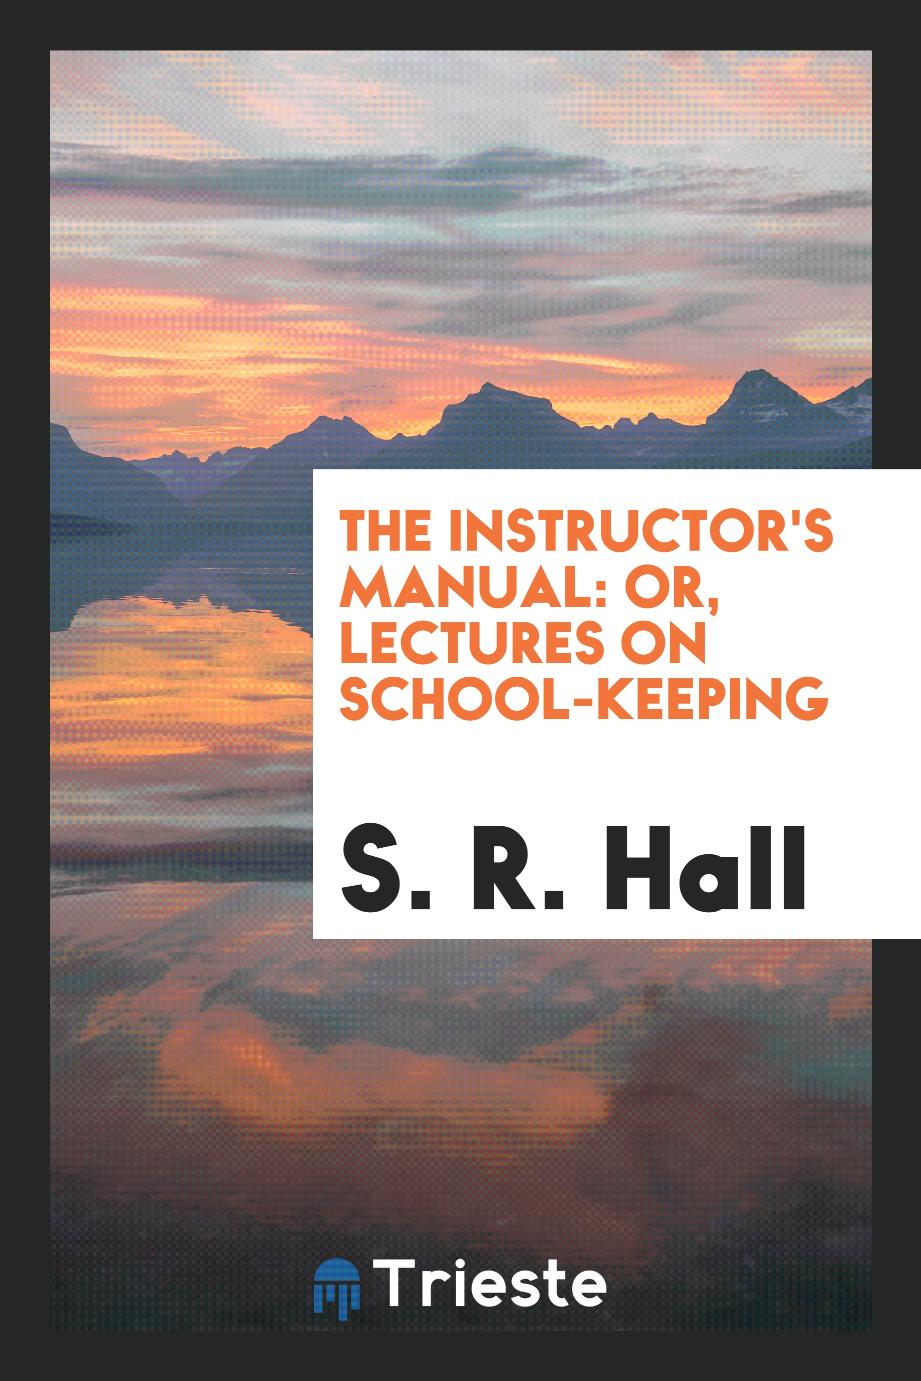 The instructor's manual: or, Lectures on school-keeping